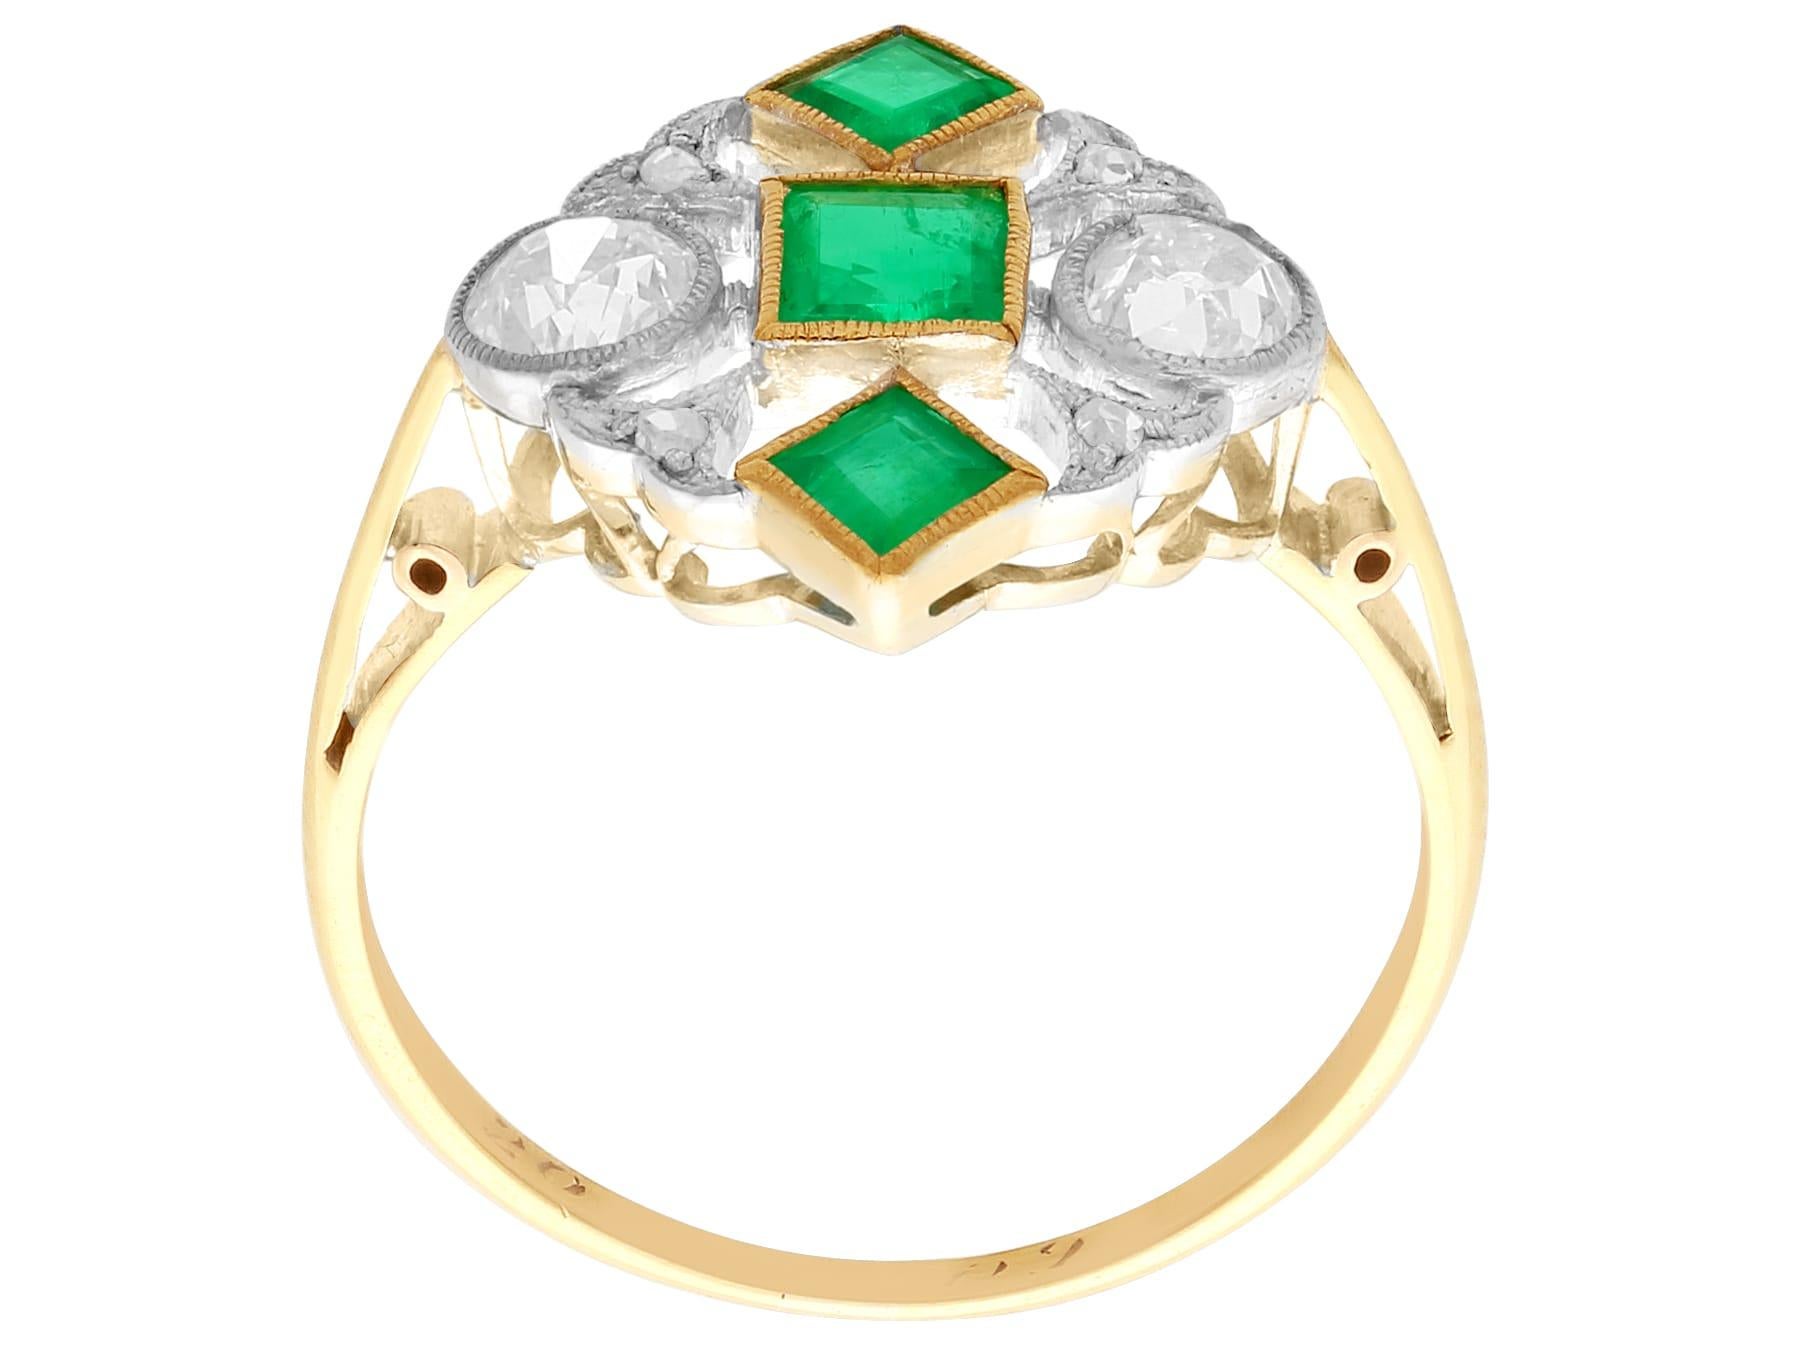 Antique Art Deco Emerald and Diamond Yellow Gold Cocktail Ring, circa 1920 In Excellent Condition For Sale In Jesmond, Newcastle Upon Tyne